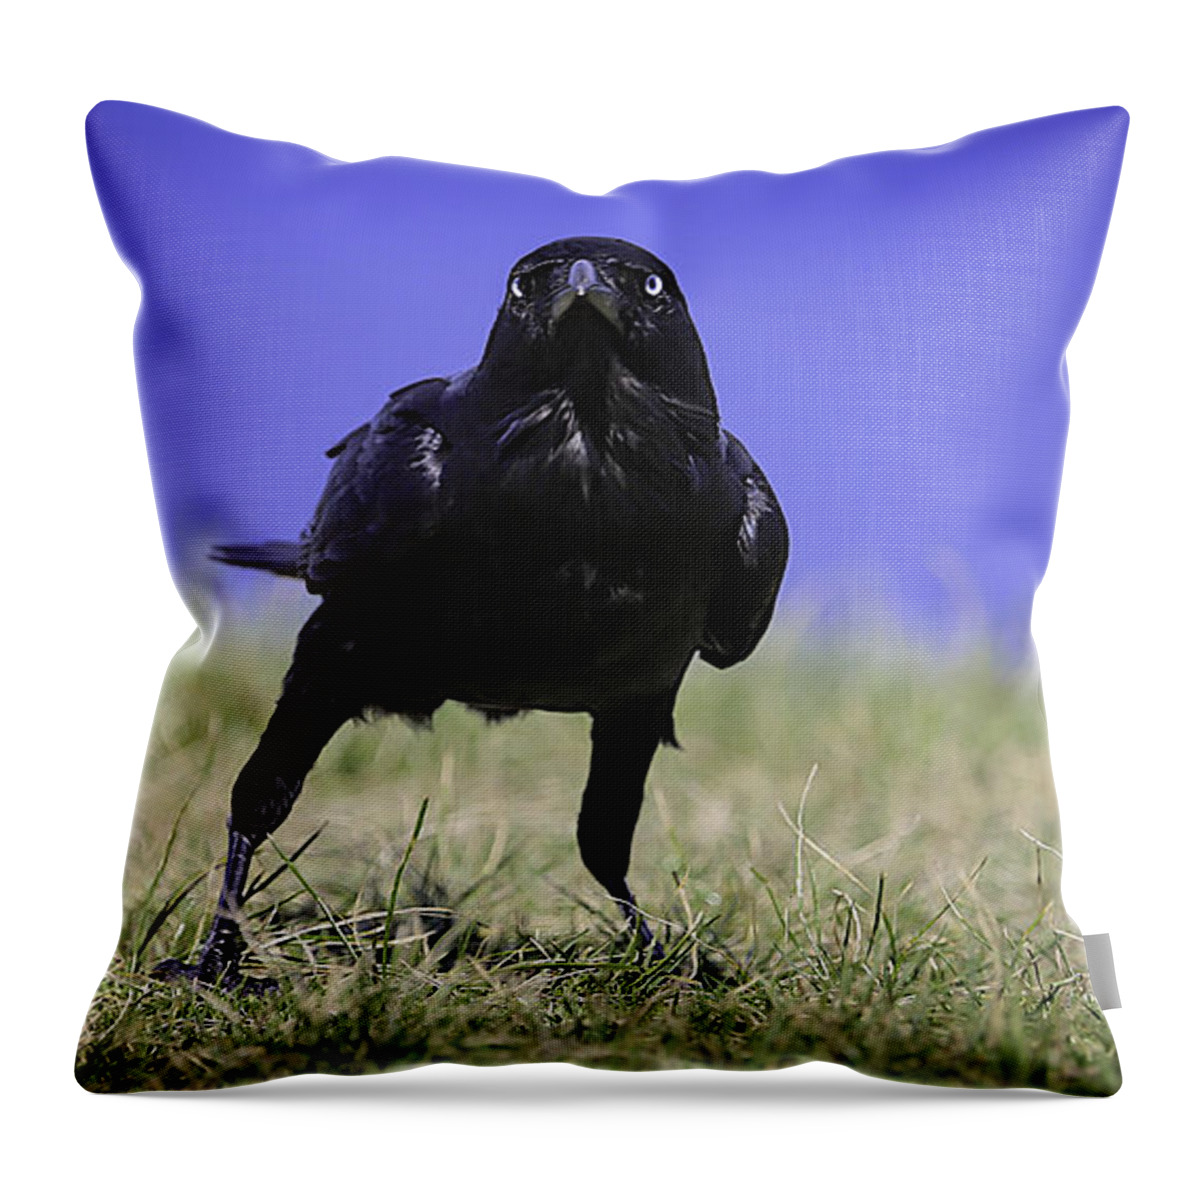 Wildlife Throw Pillow featuring the photograph Menacing Crow by Chris Cousins